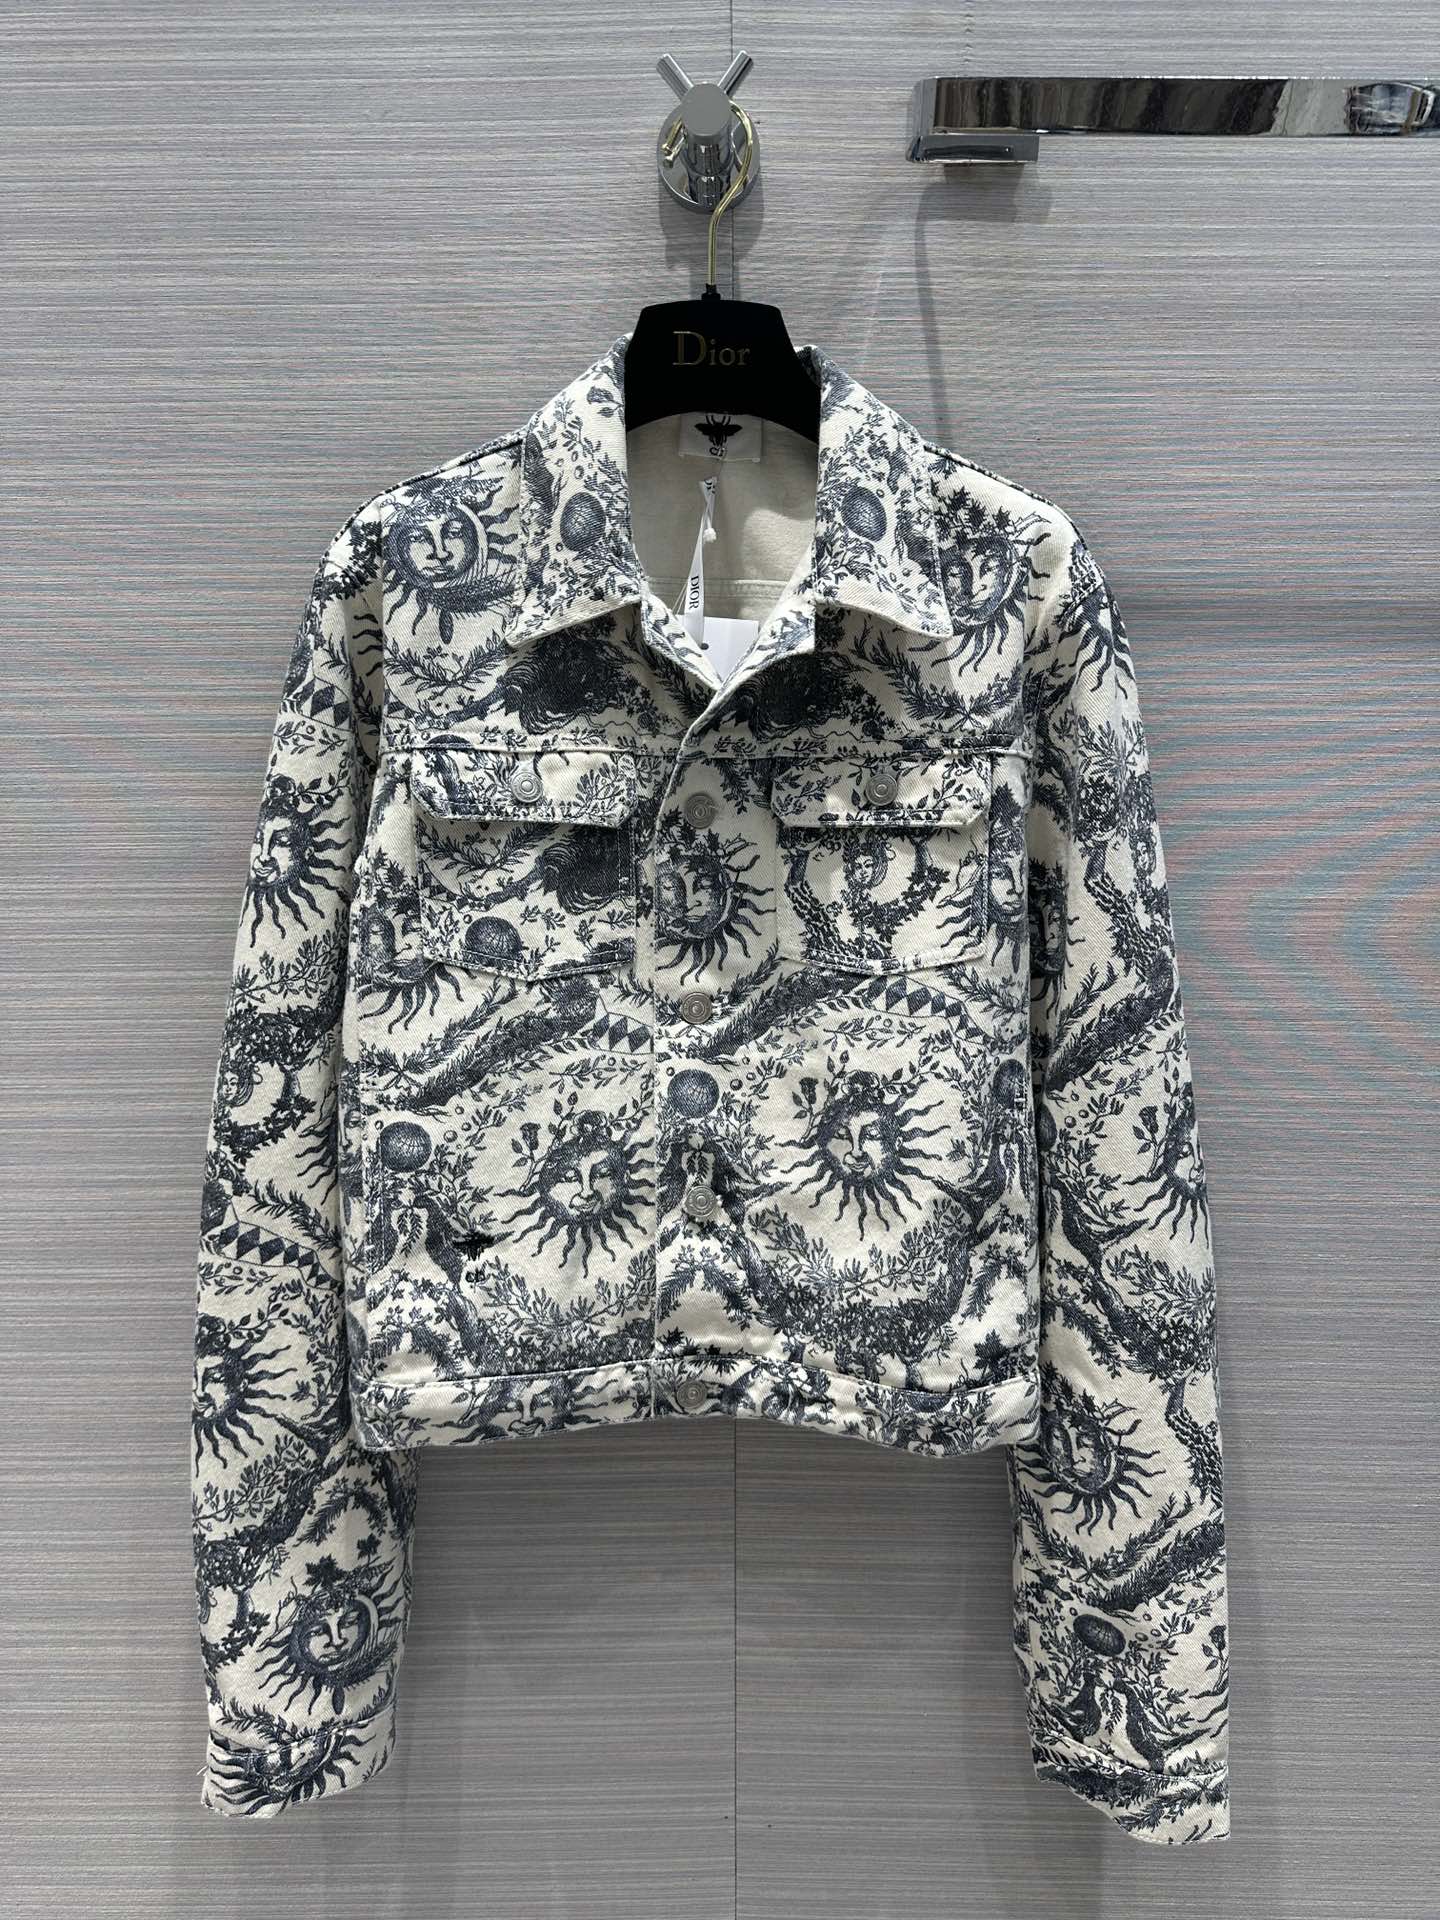 Dior Clothing Coats & Jackets Printing Cotton Denim Spring/Summer Collection Casual